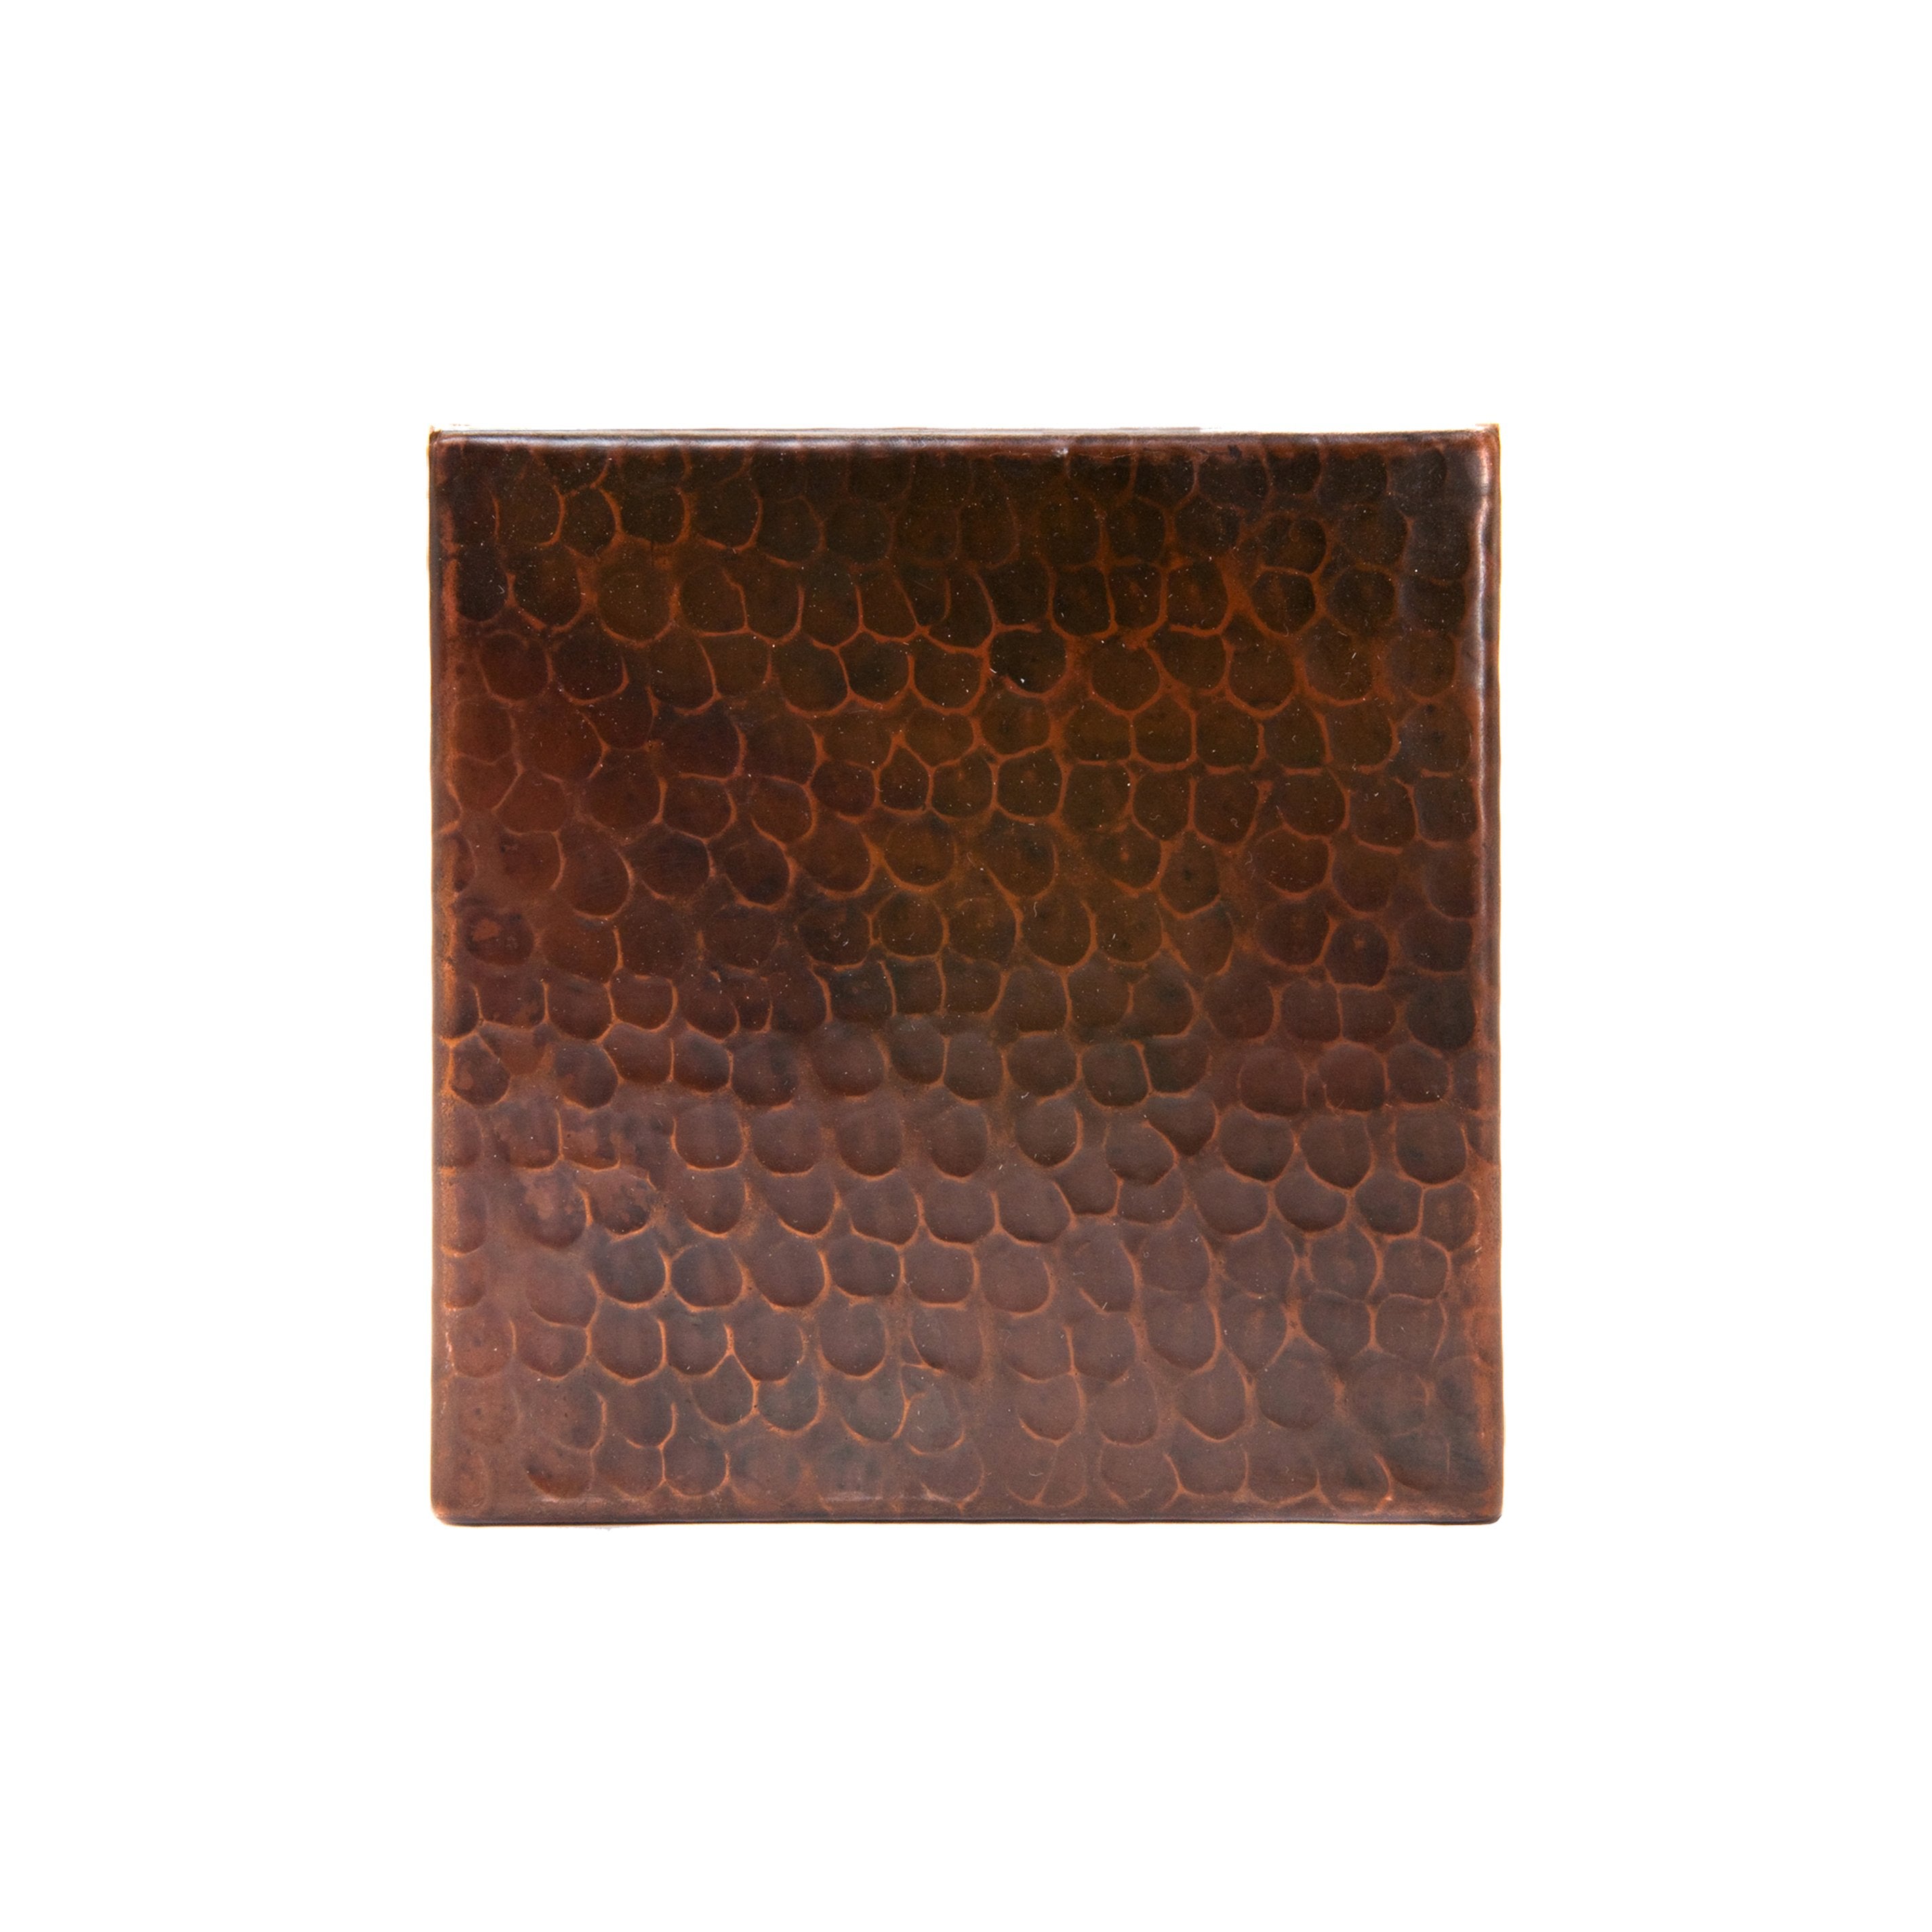 Premier Copper Products 6" x 6" Hammered Copper Tile - Quantity 8-DirectSinks